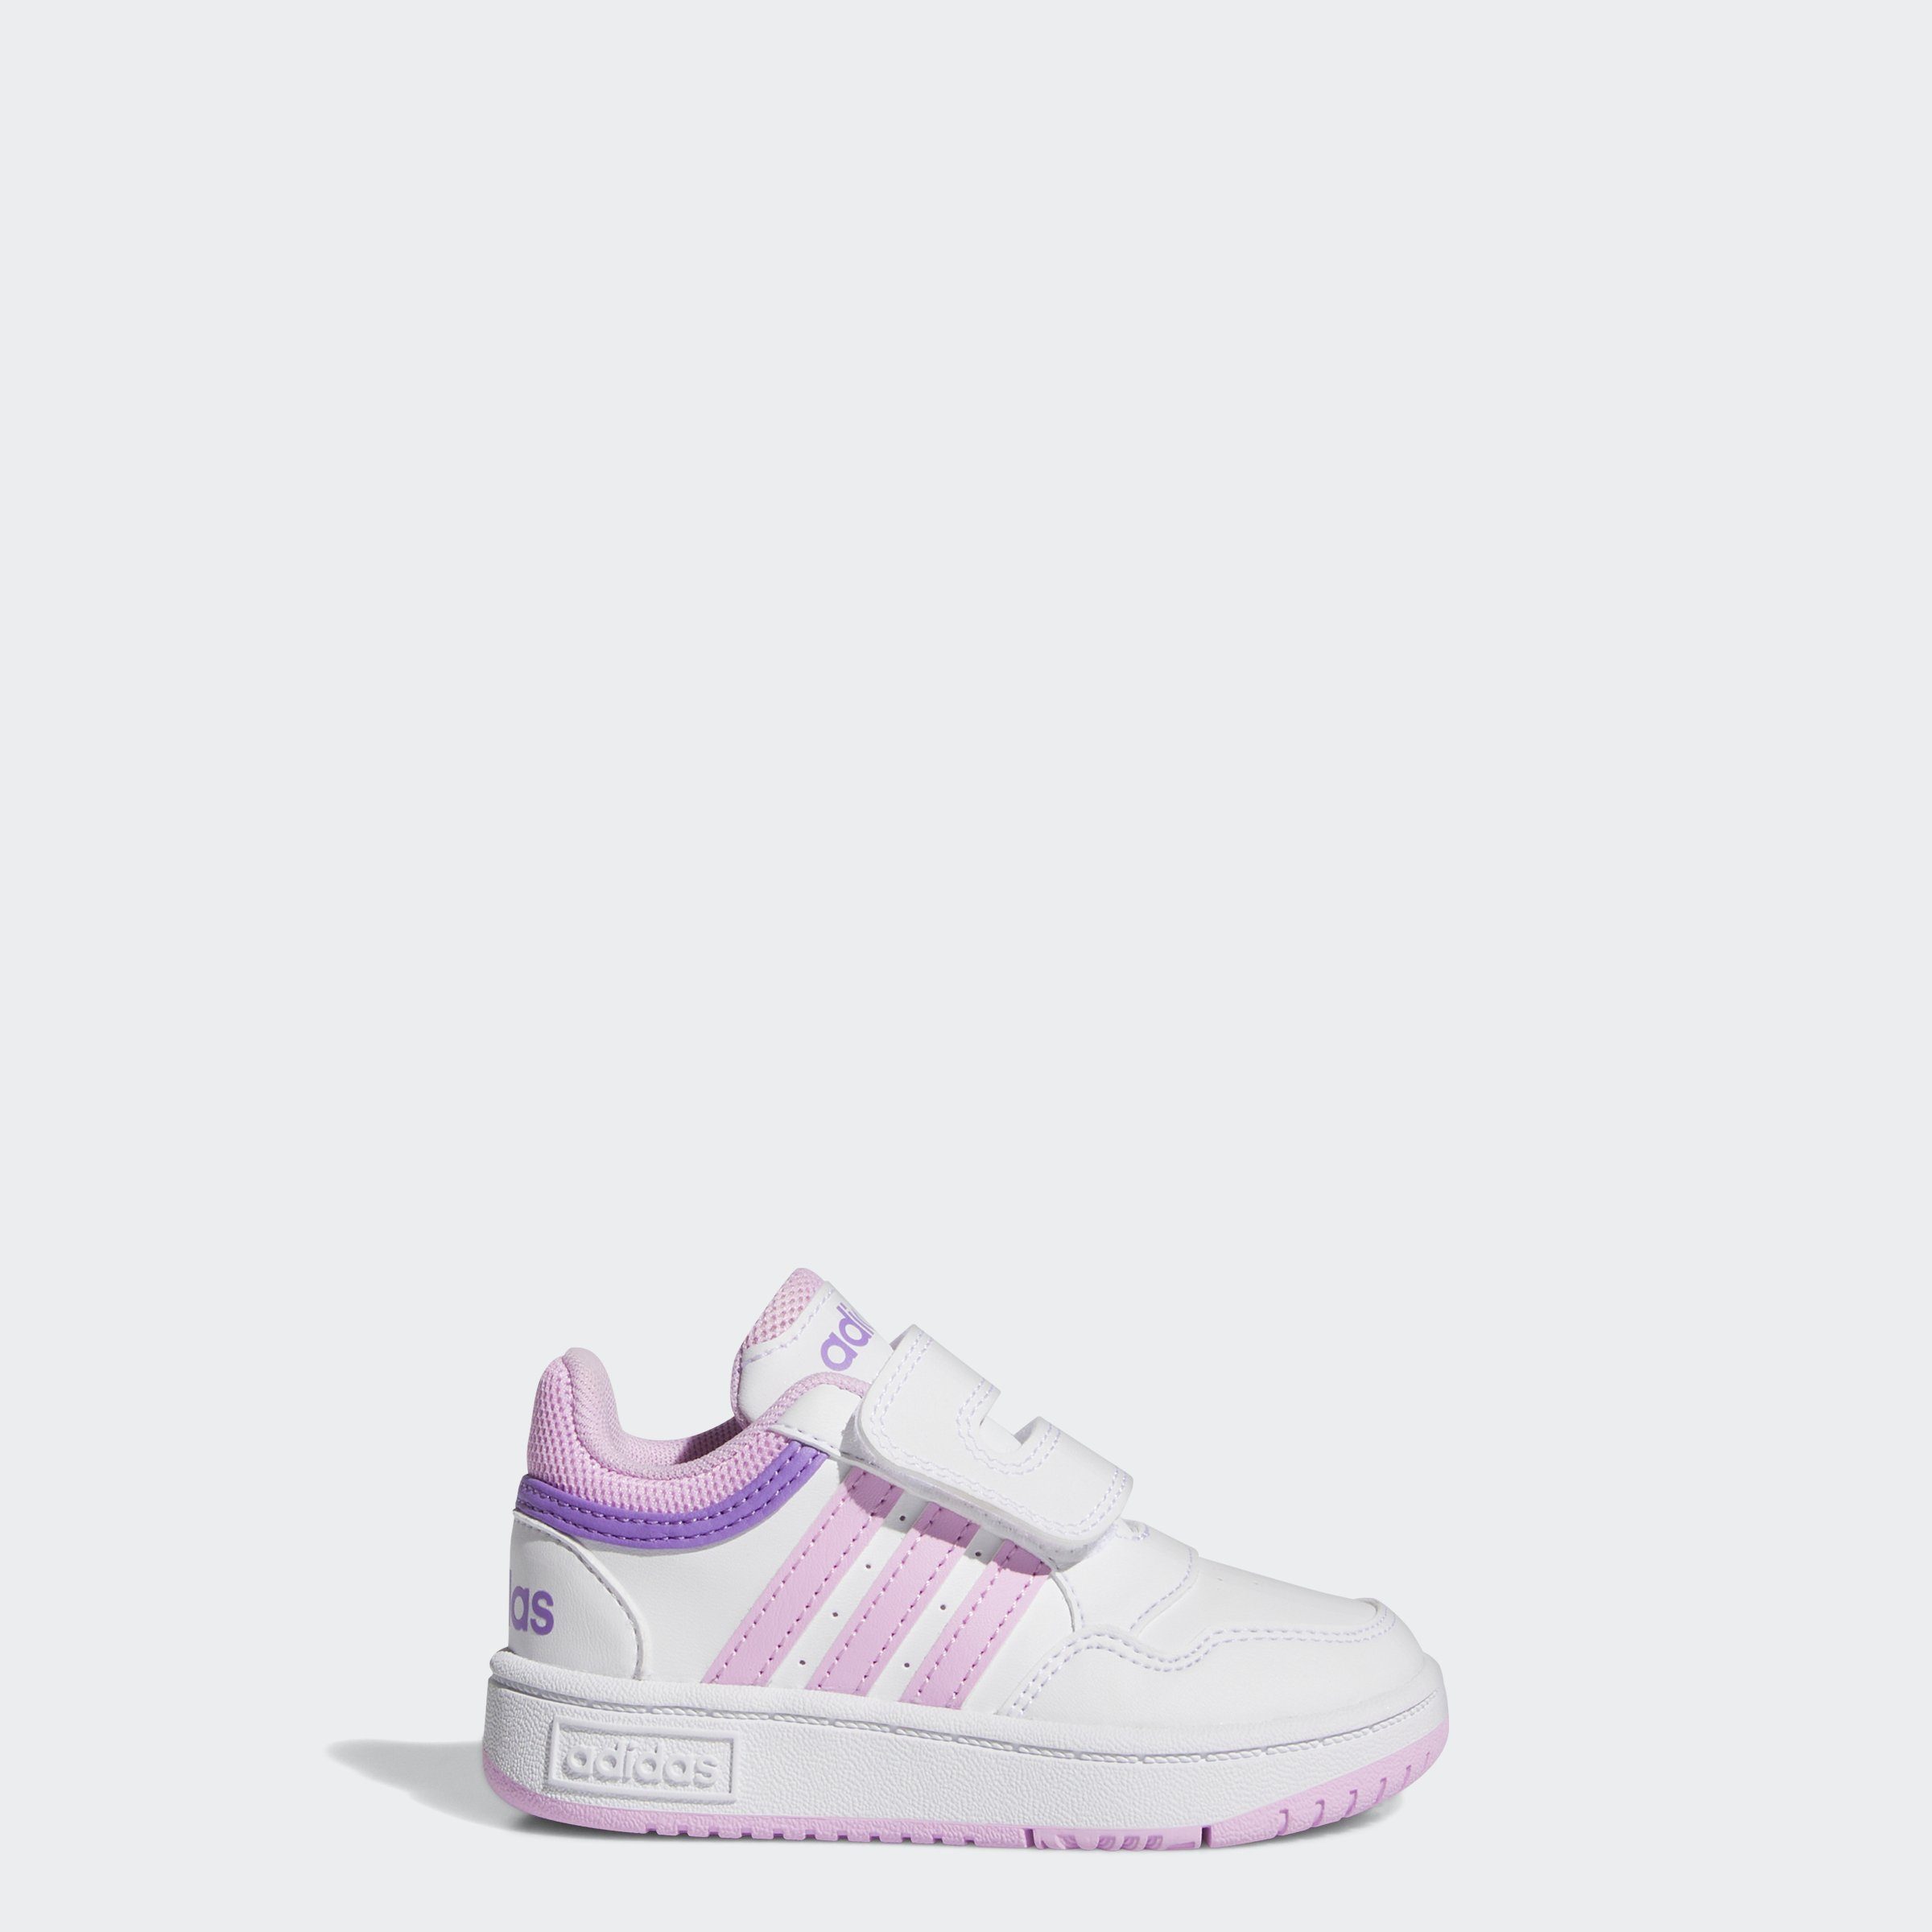 adidas Sportswear / Bliss White Sneaker / Violet Fusion HOOPS Cloud Lilac